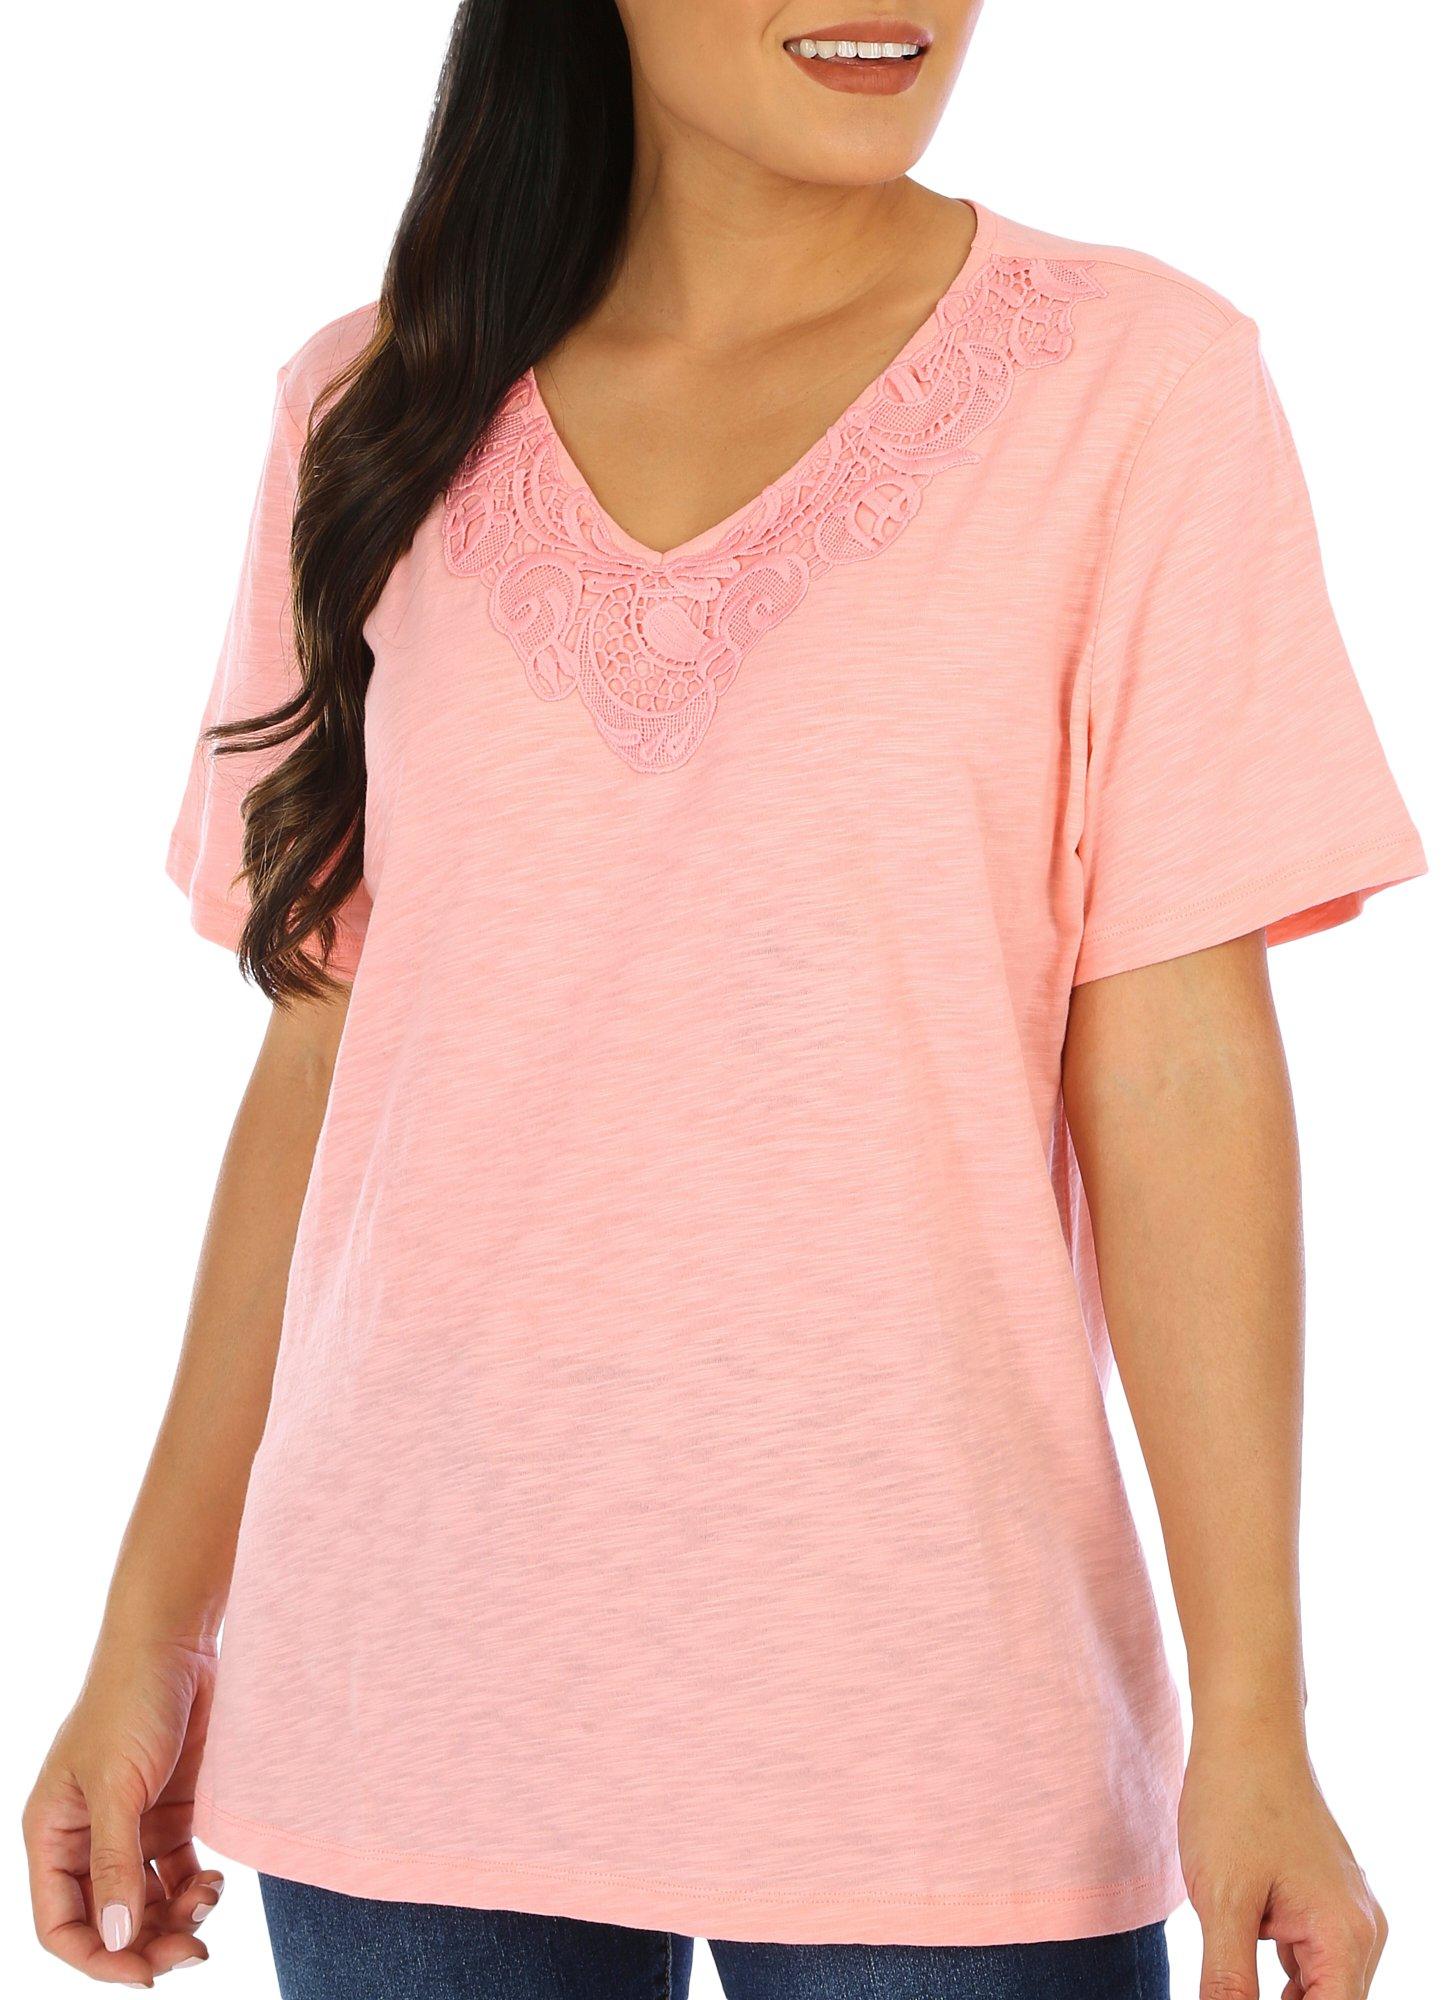 Coral Bay Womens Short Sleeve Lace V-Neckline Tee